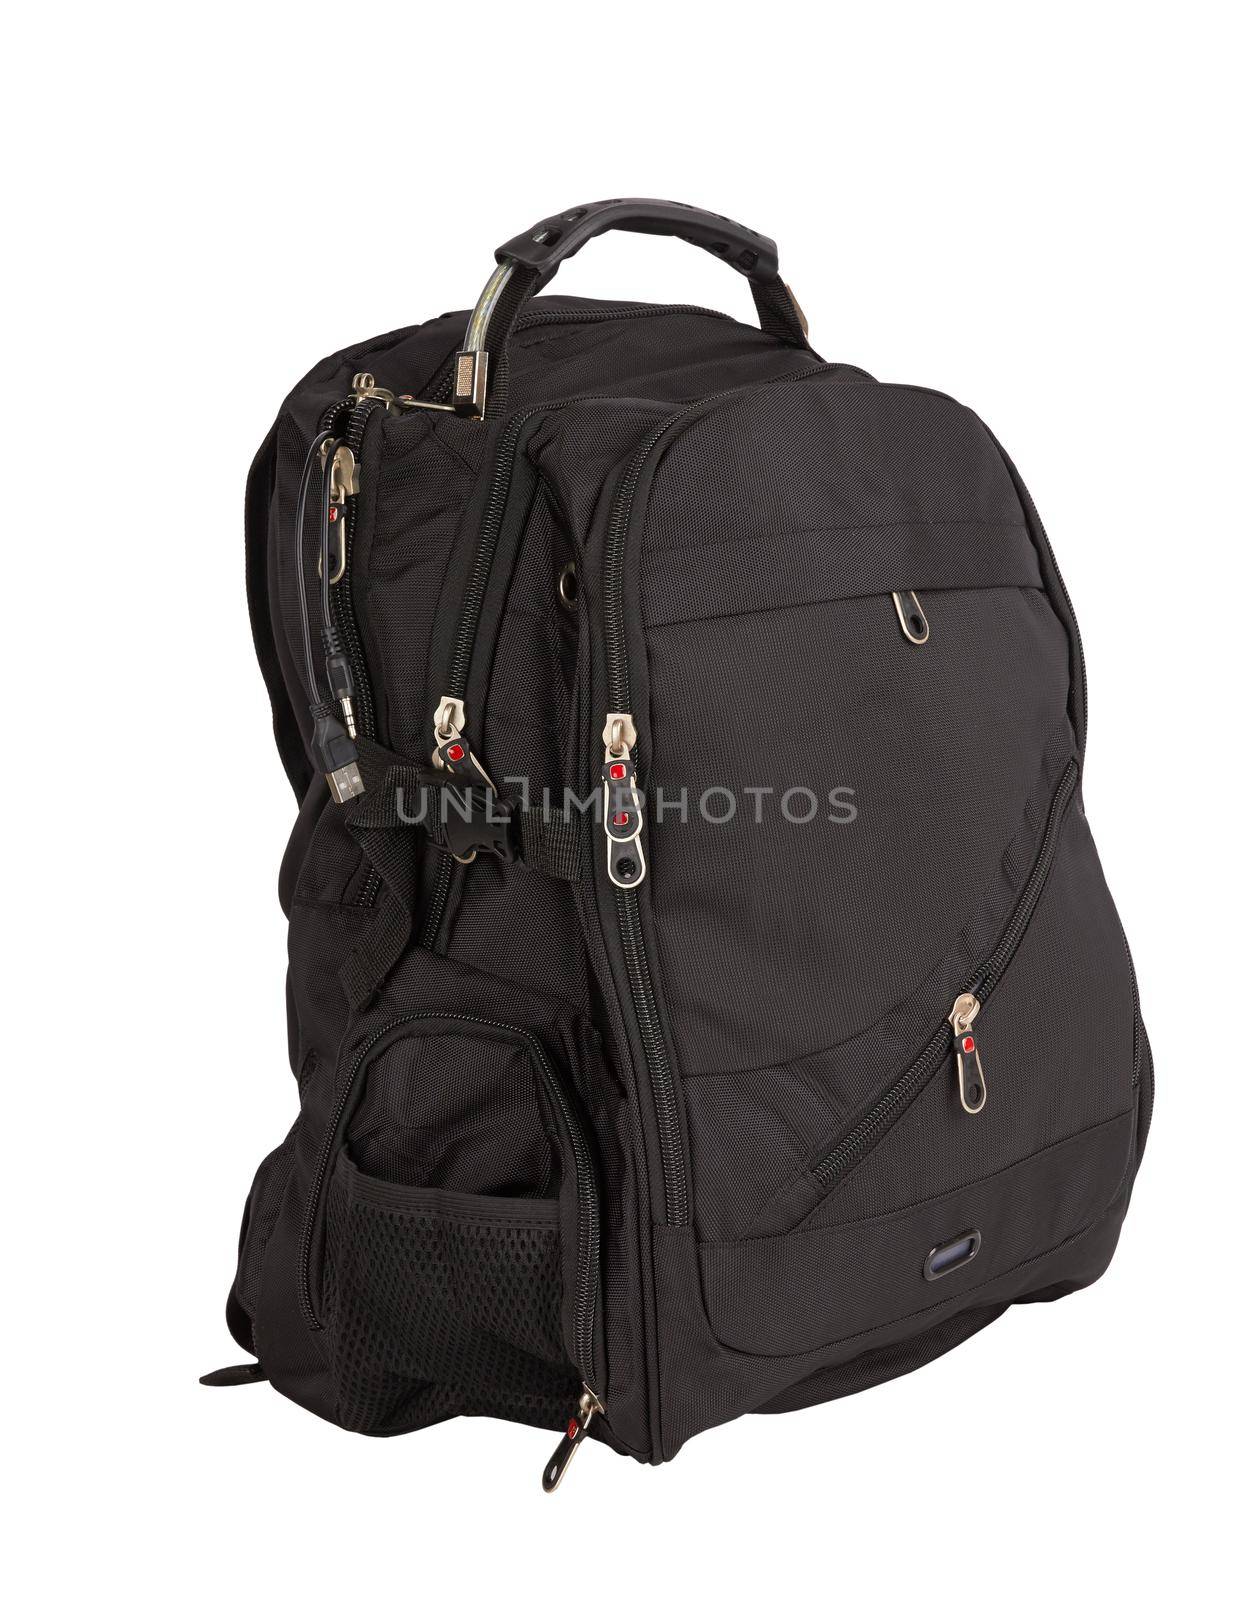 Big backpack for travel isolate on a white background